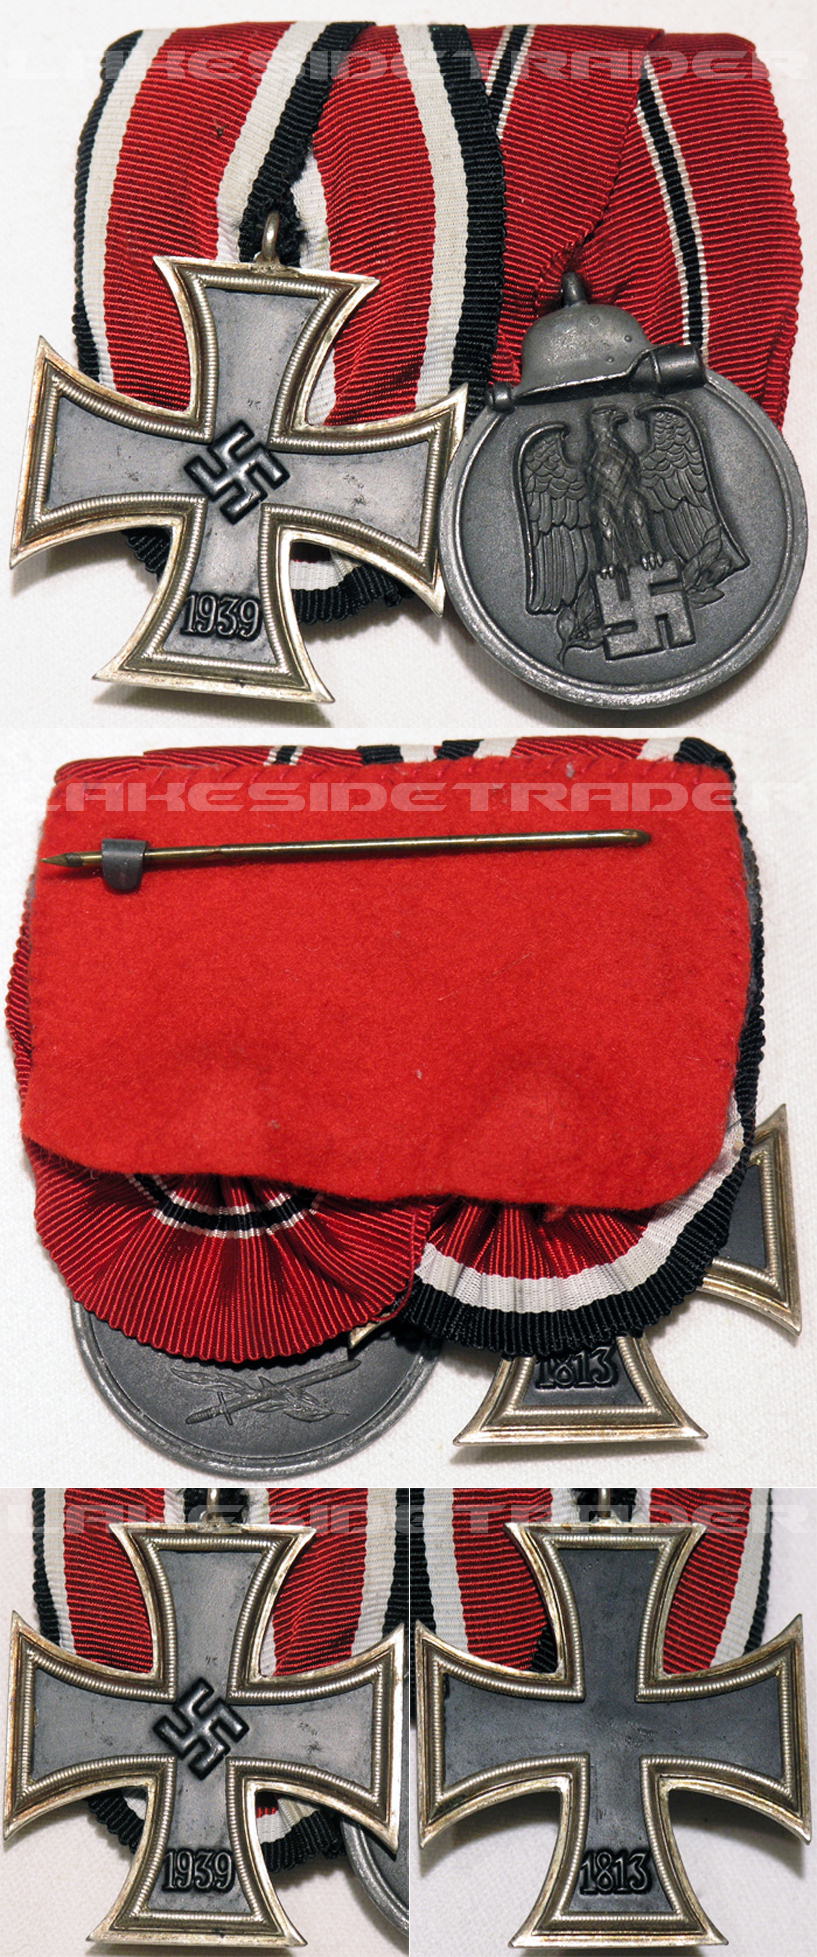 Two Place Medal Bar with Schinkel EKII 